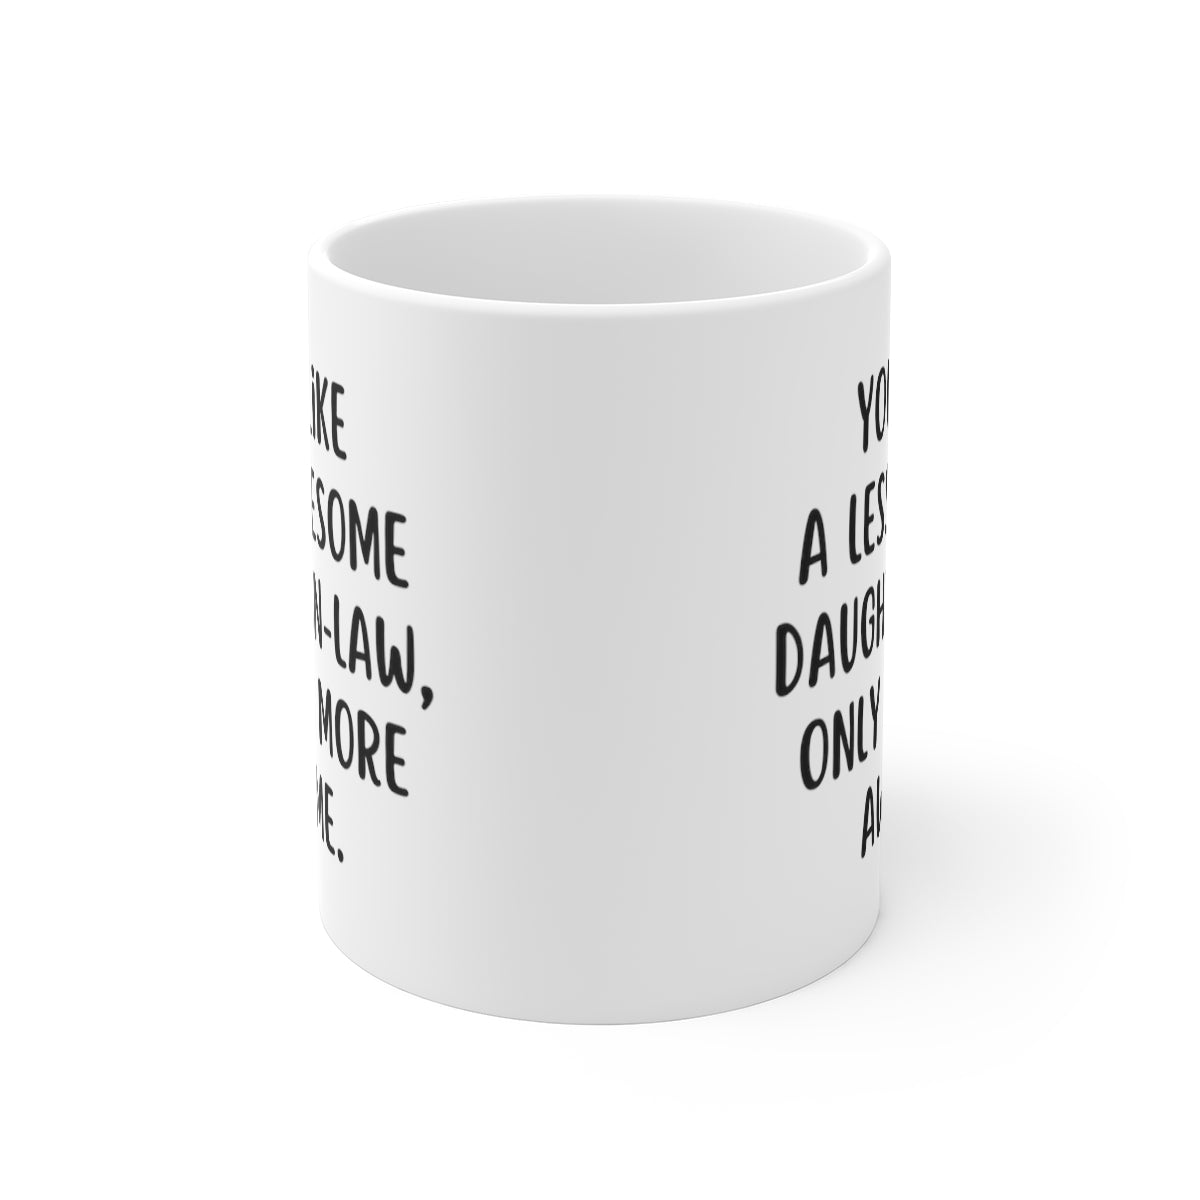 You're Like A Less Awesome Daughter-In-Law, Only Way More Awesome | Funny, Snarky Gift | White Ceramic Mug, Fun Block Font